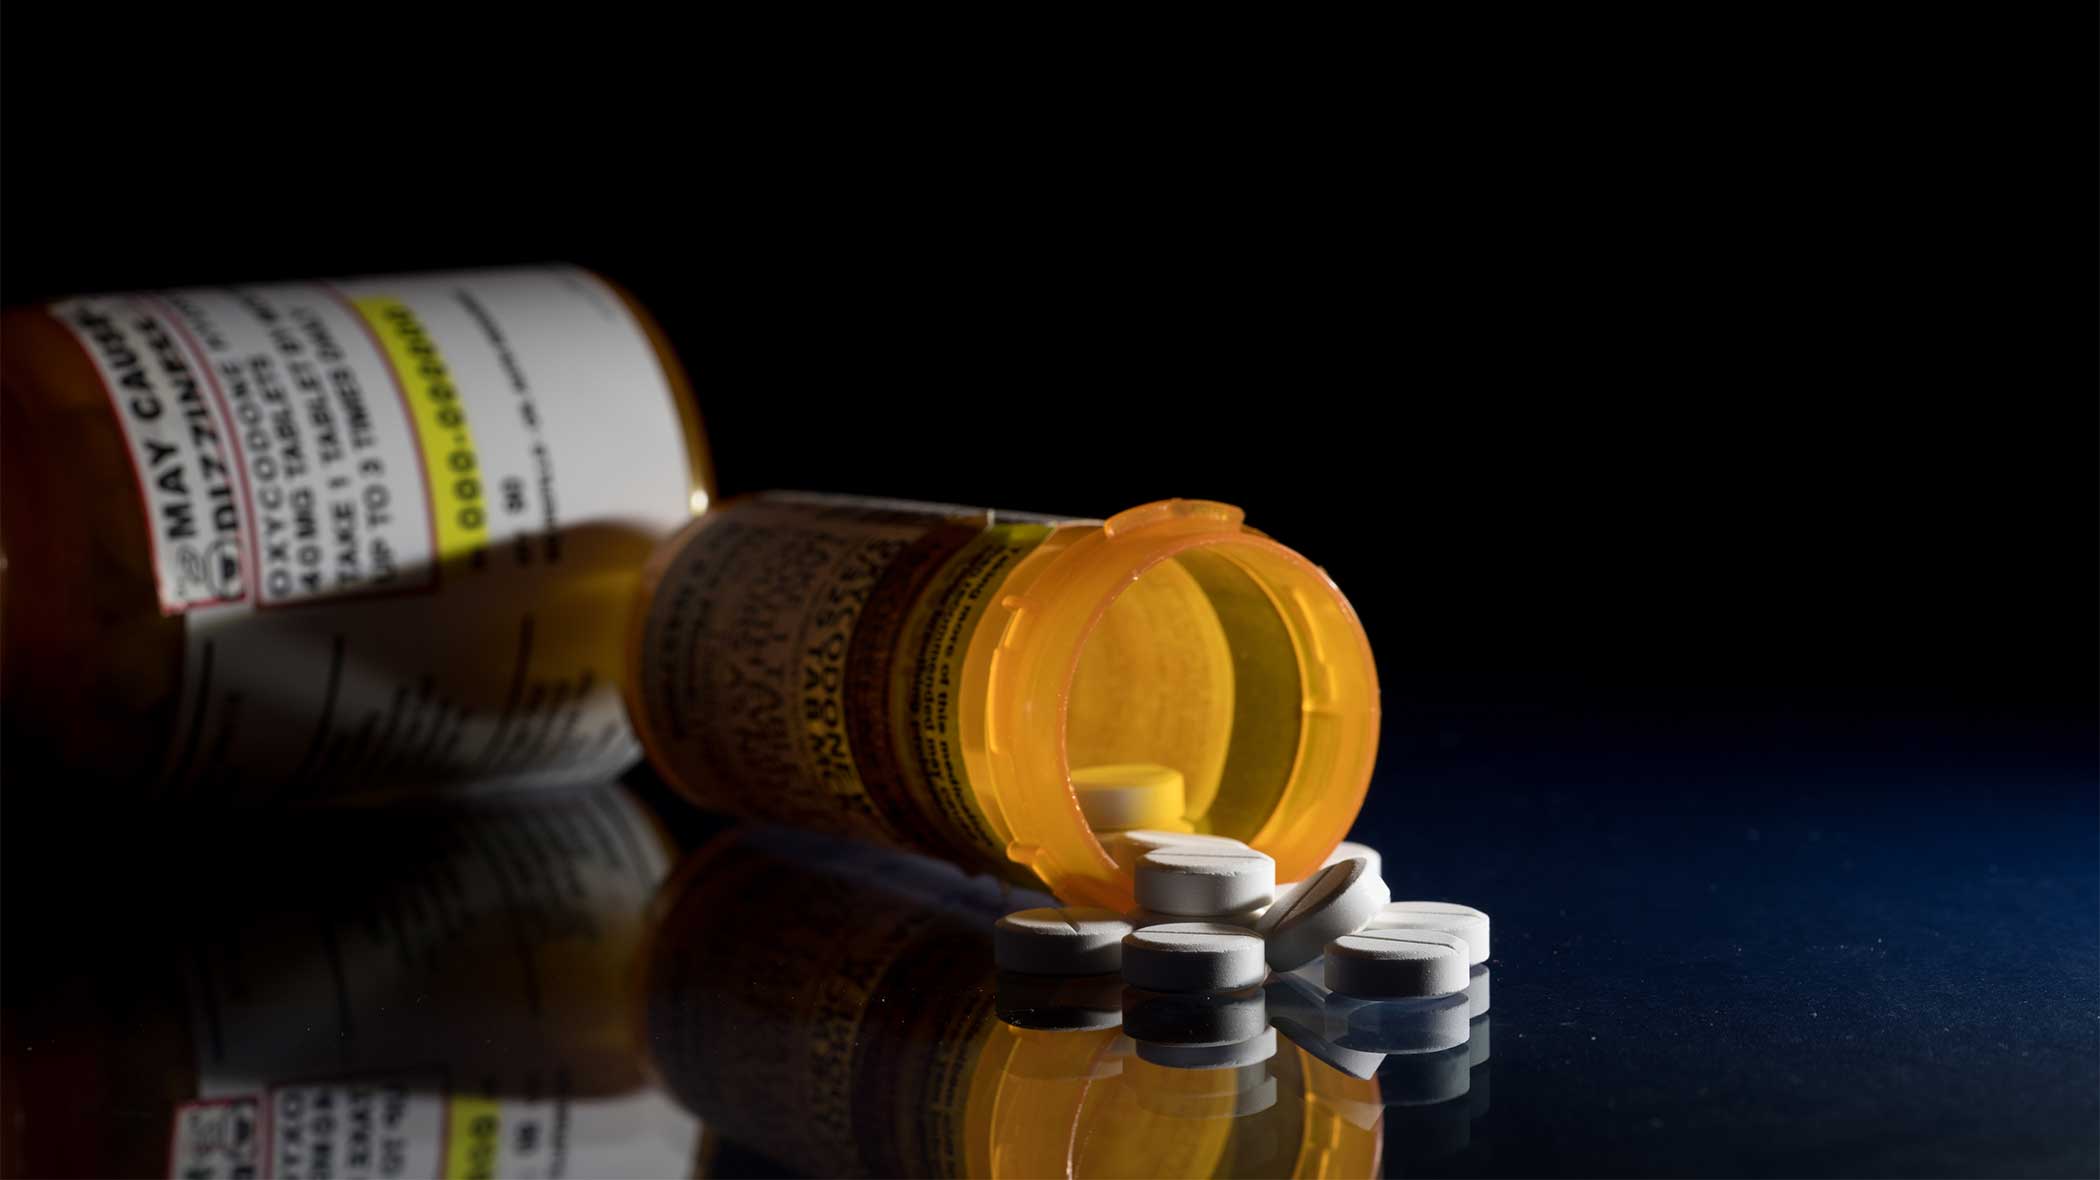 How Many People Die From Opioids In The US Each Year?